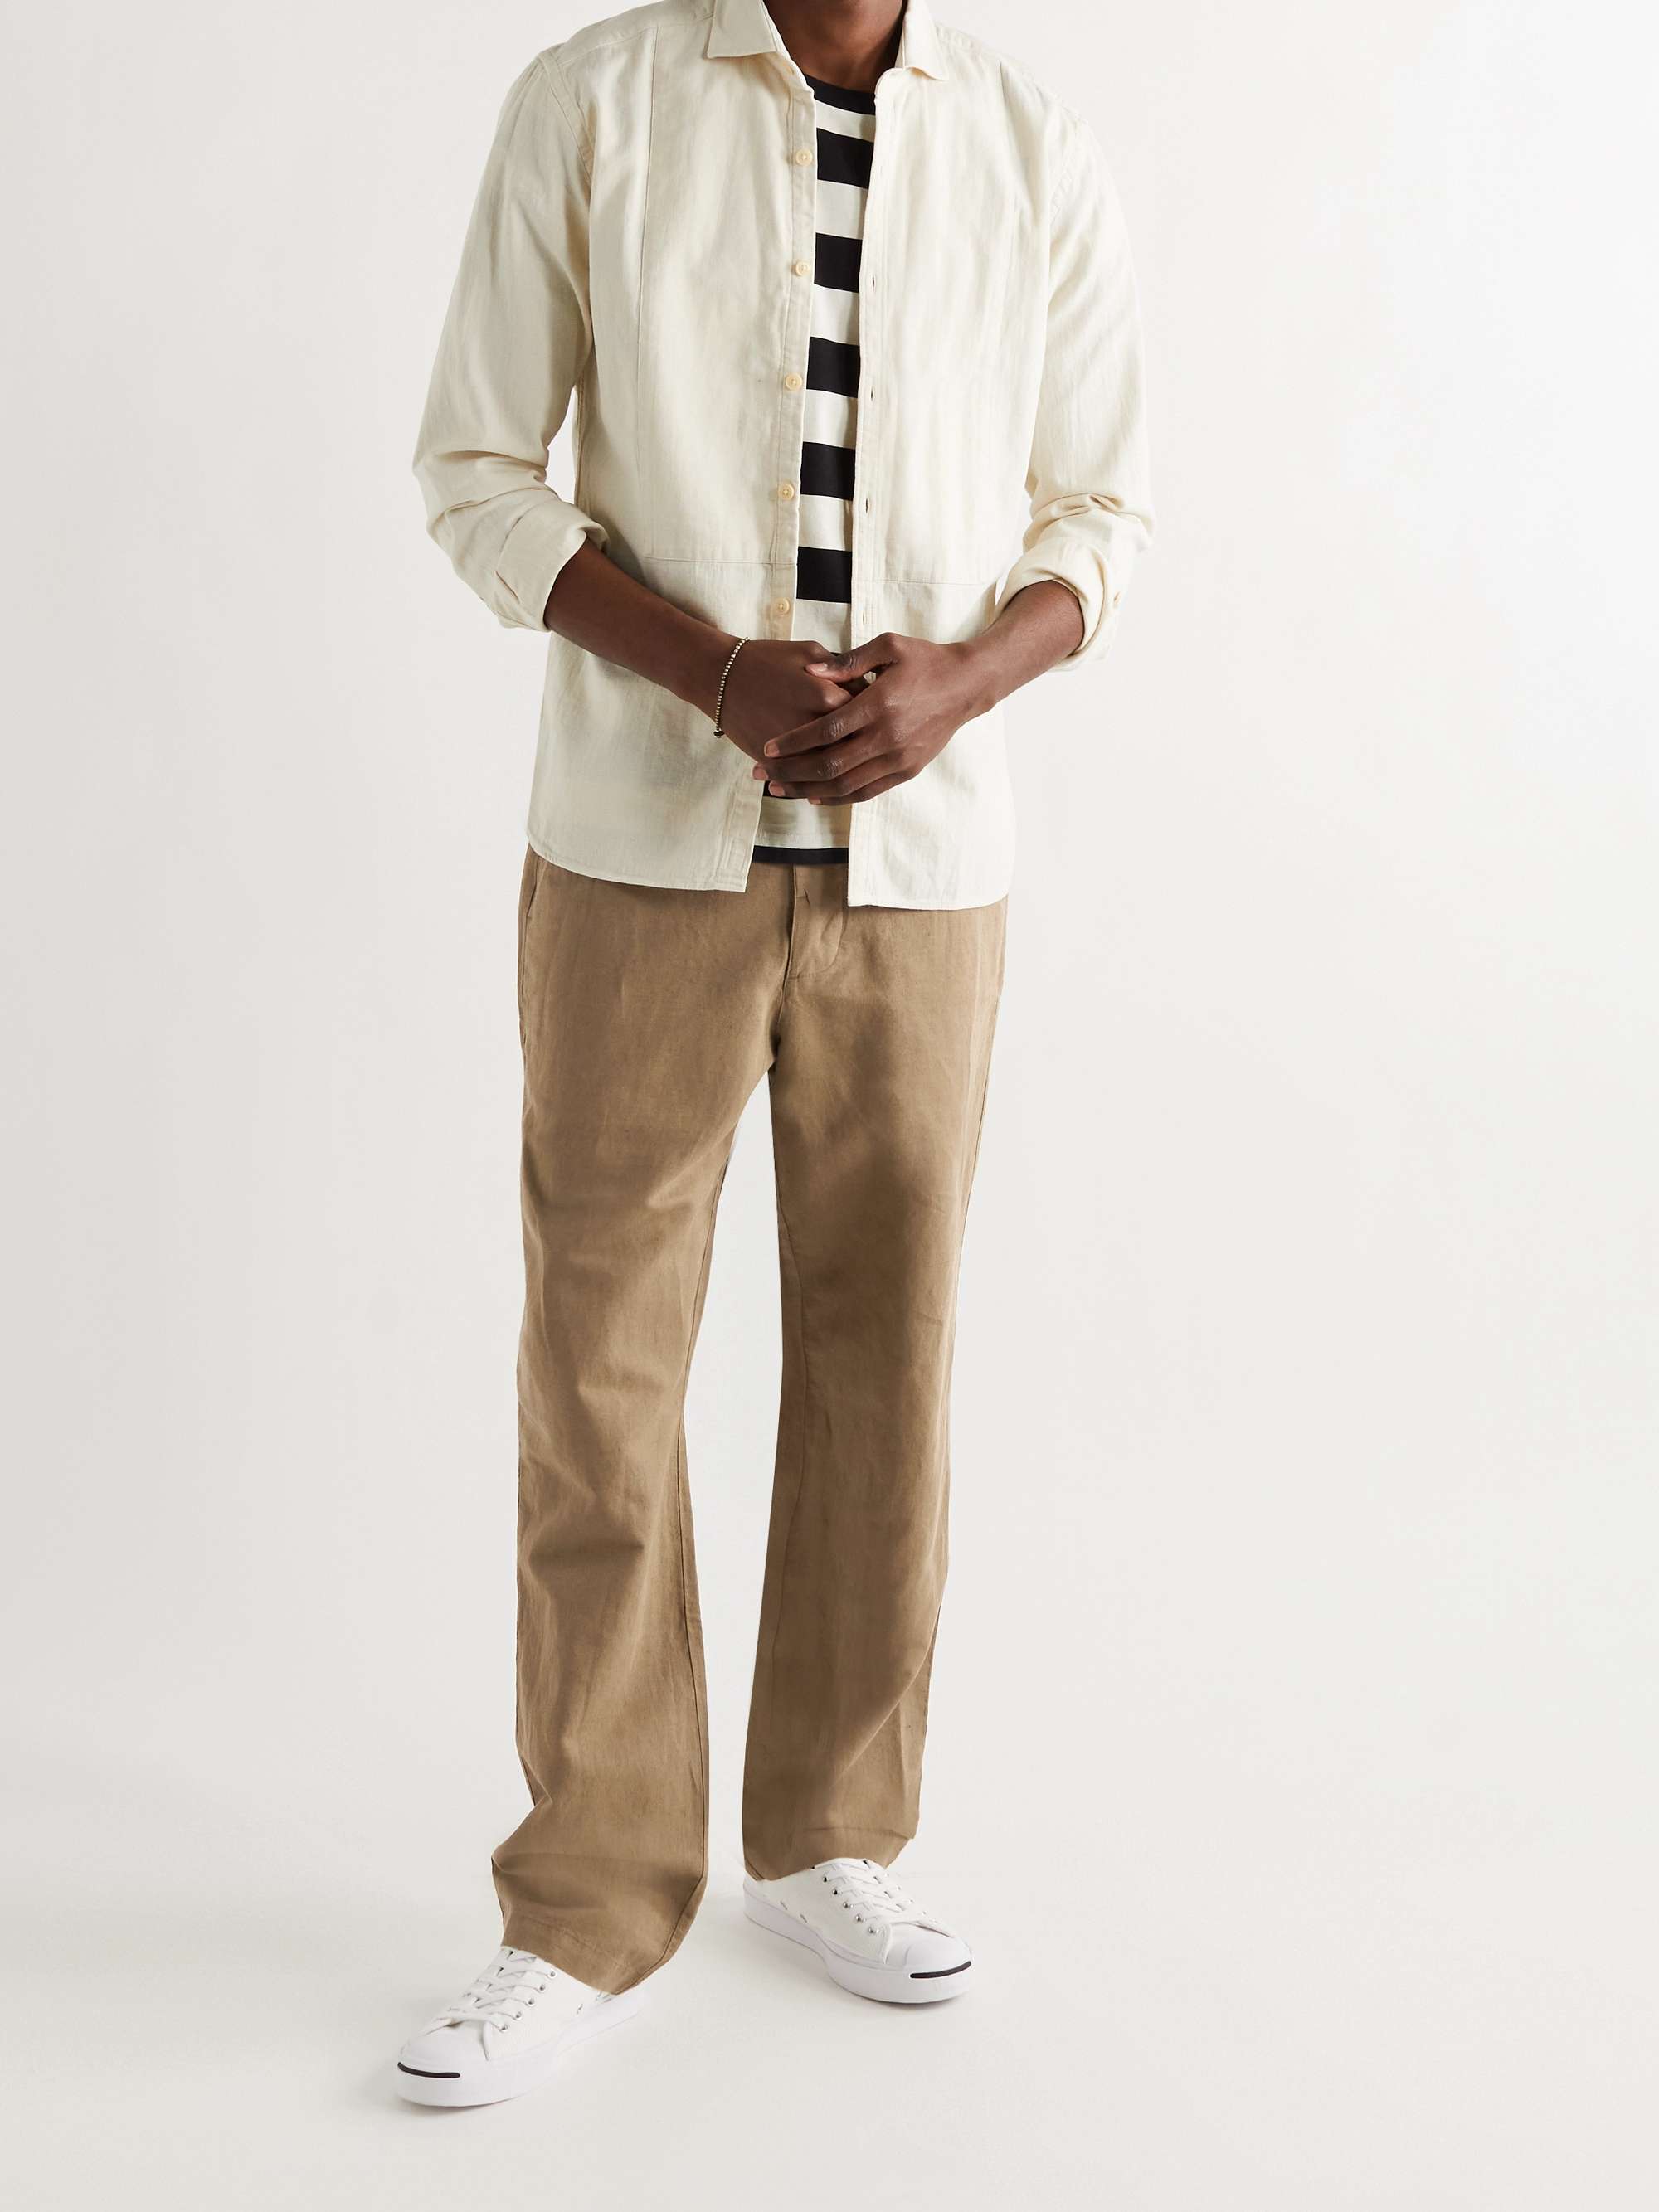 OLIVER SPENCER Linen and Cotton-Blend Drawstring Trousers